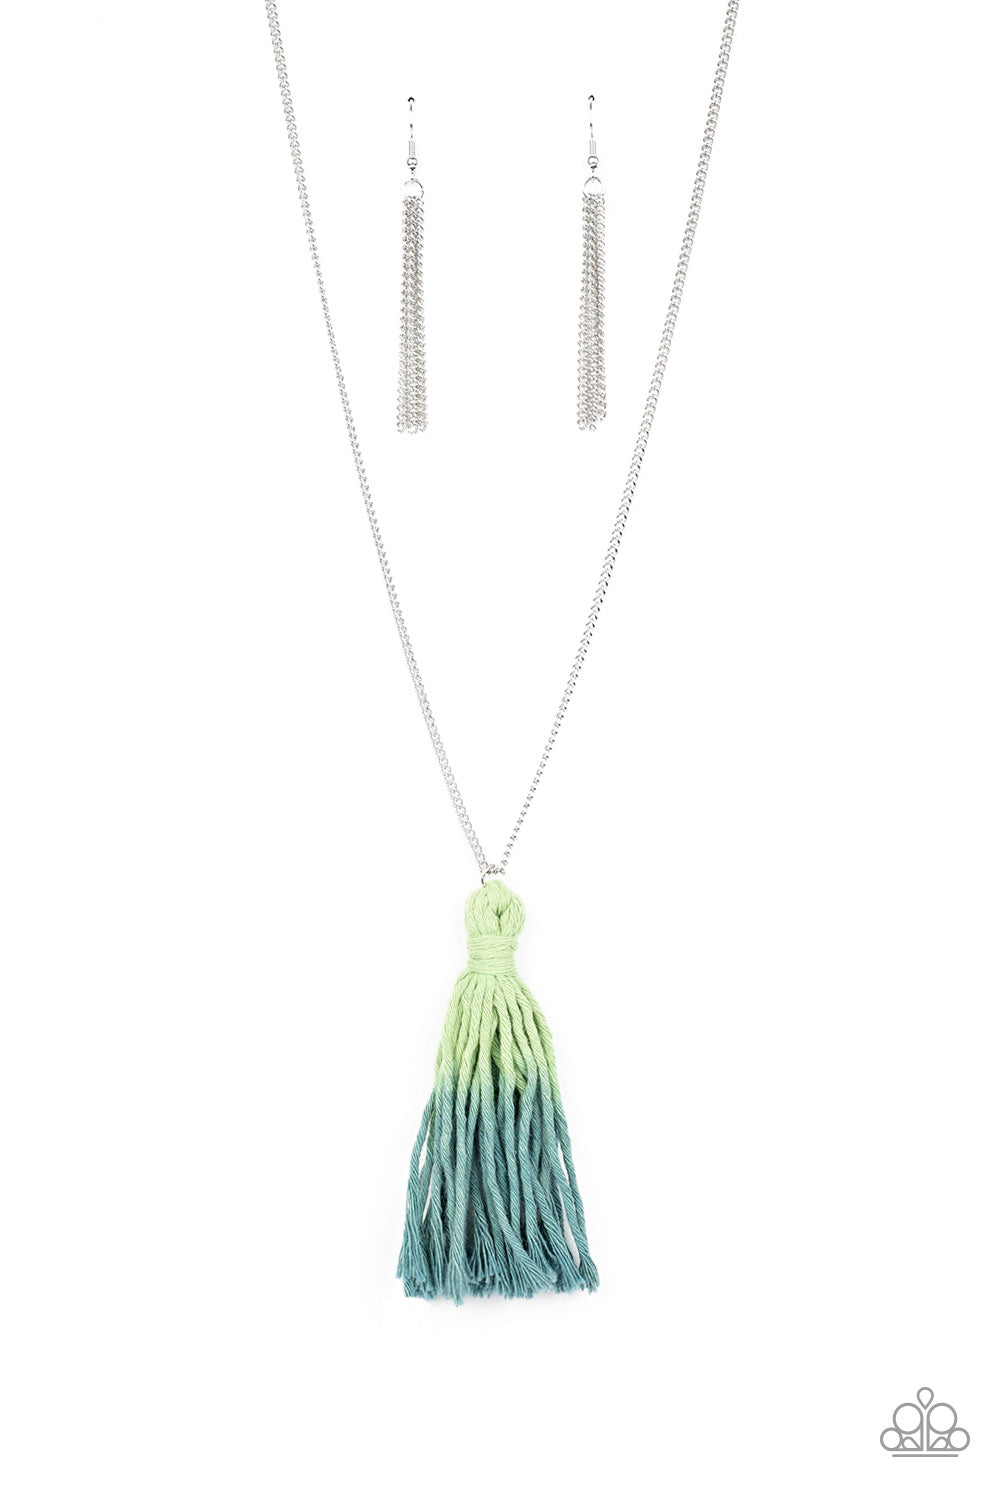 Paparazzi Necklace - Totally Tasseled - Green